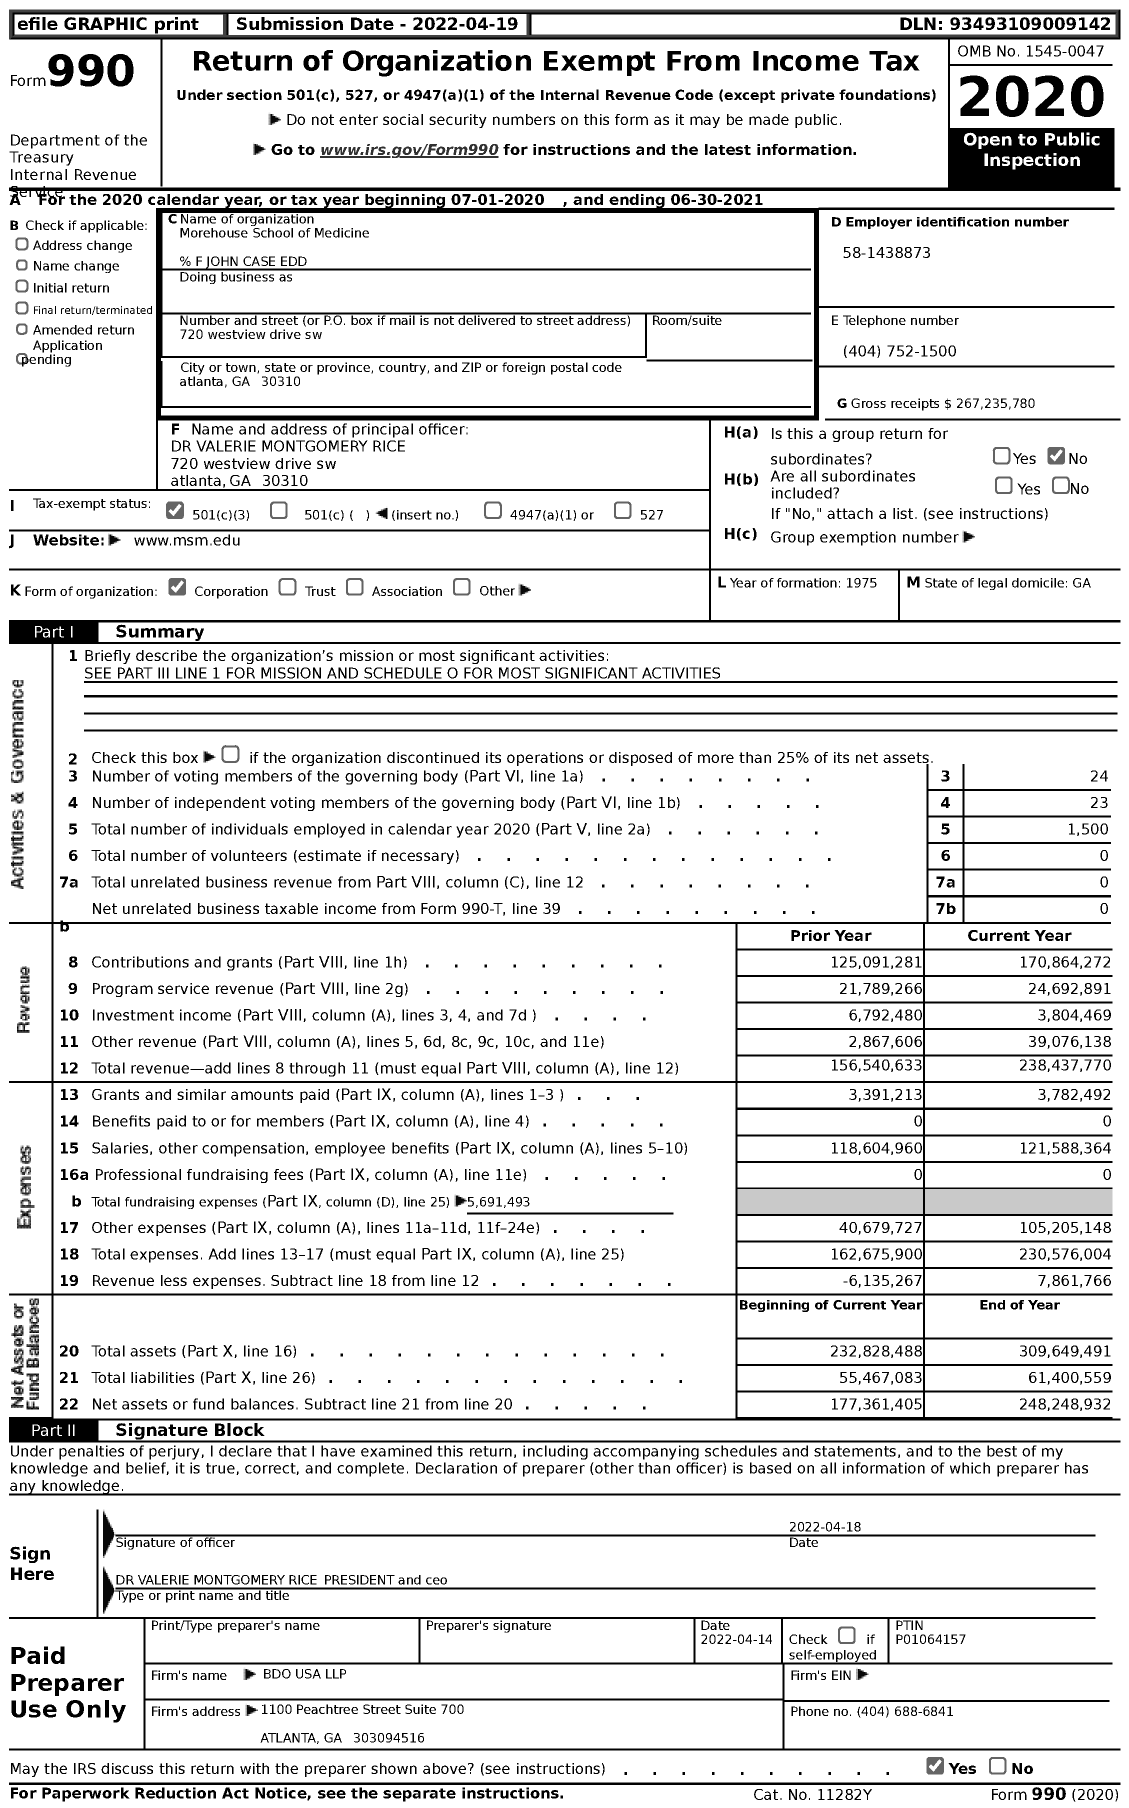 Image of first page of 2020 Form 990 for Morehouse School of Medicine (MSM)